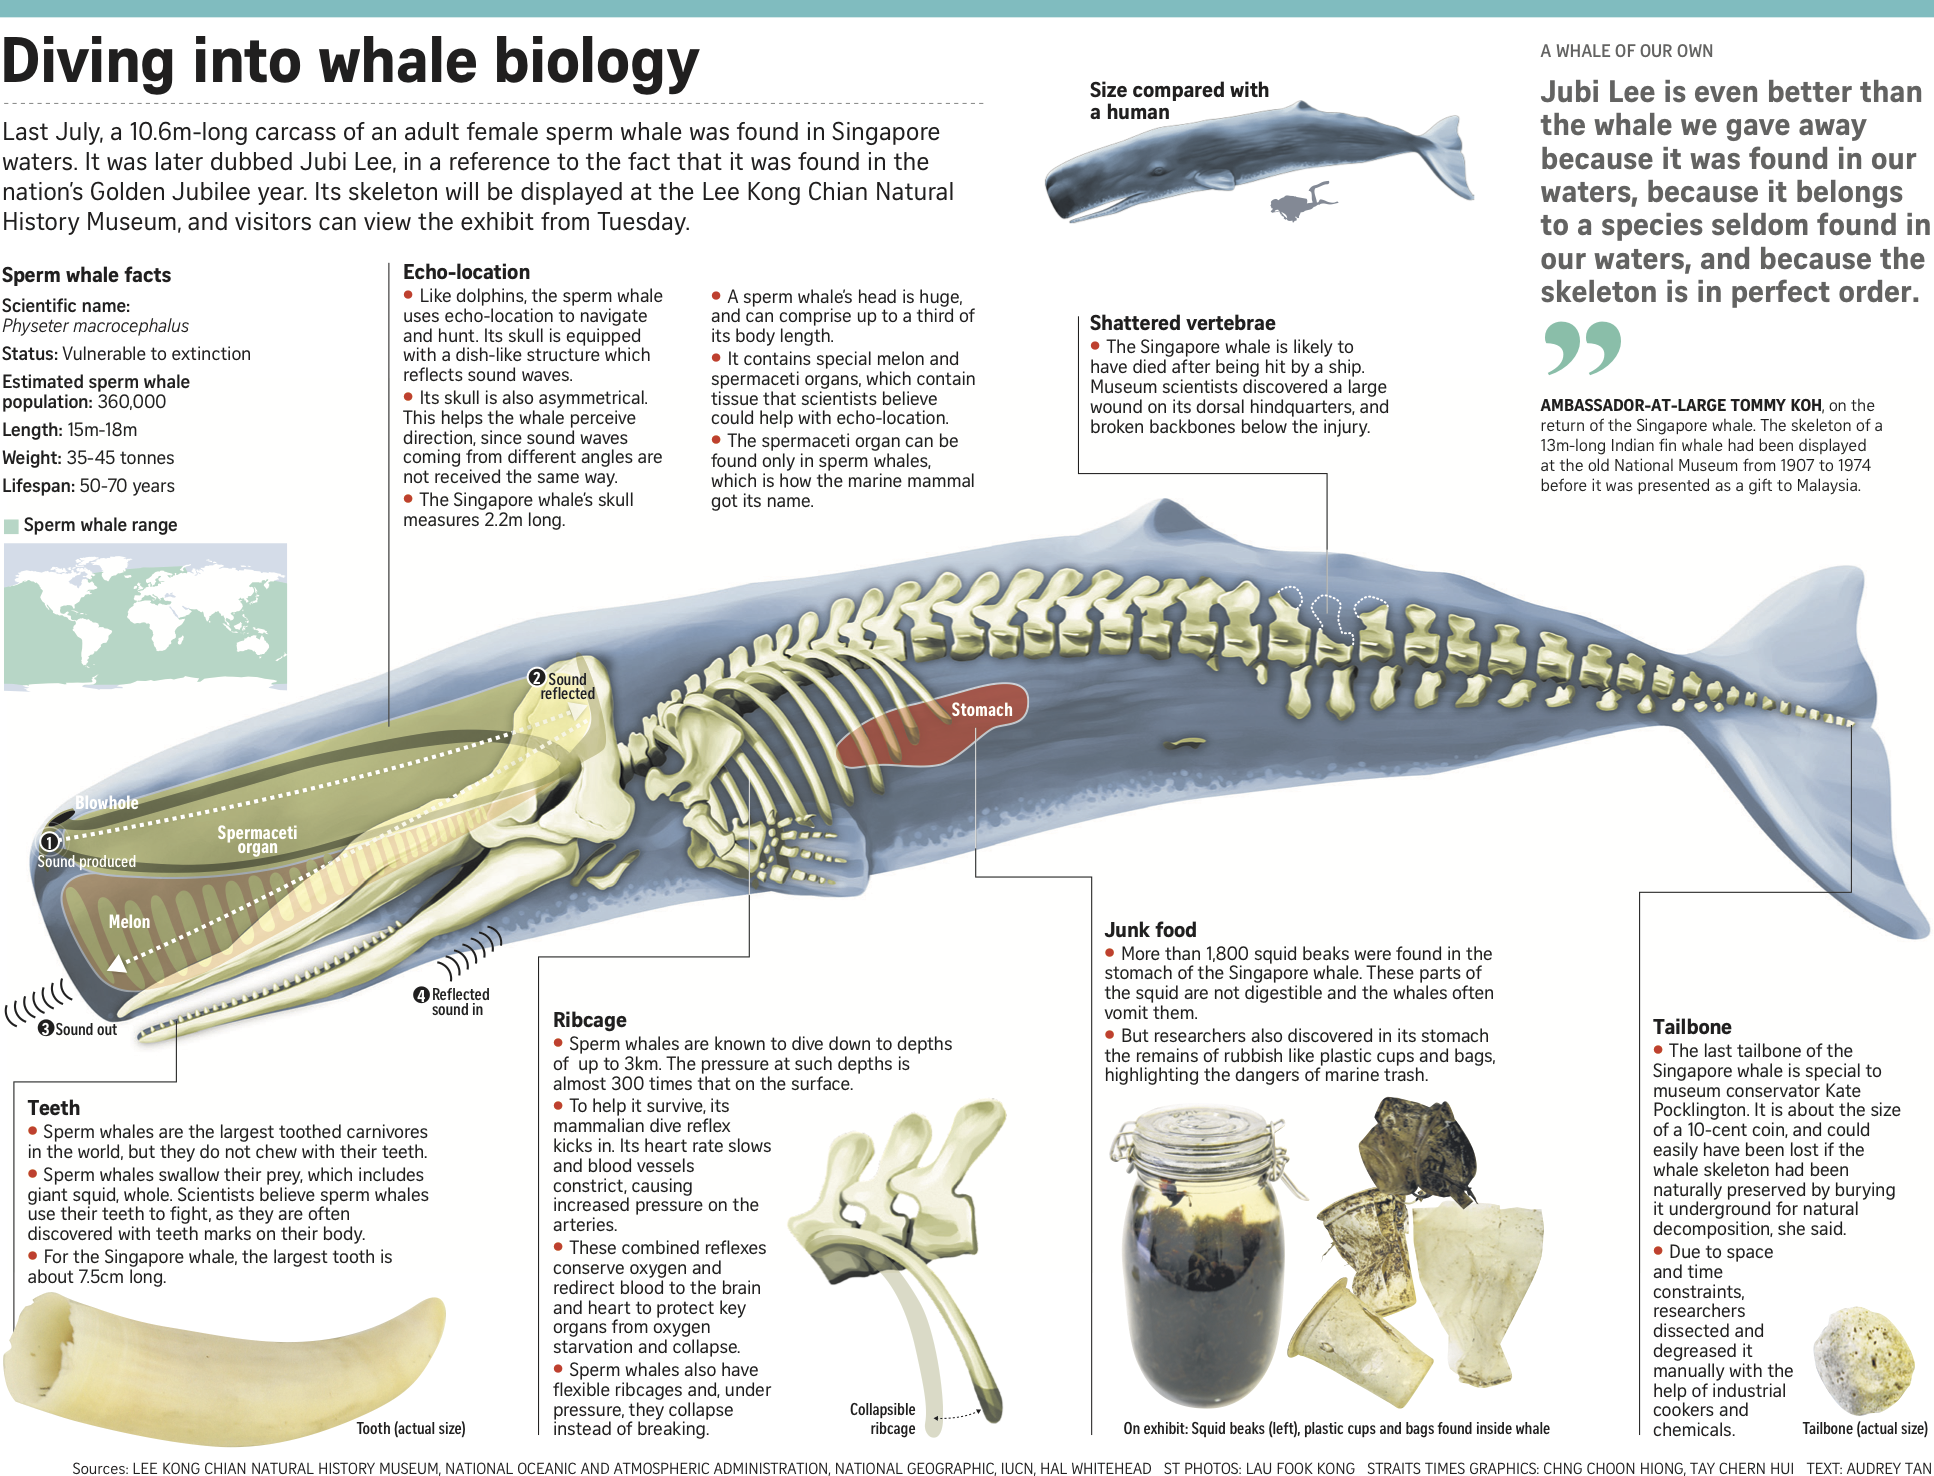 ST Infographic Diving into Whale Biology Lee Kong Chian Natural